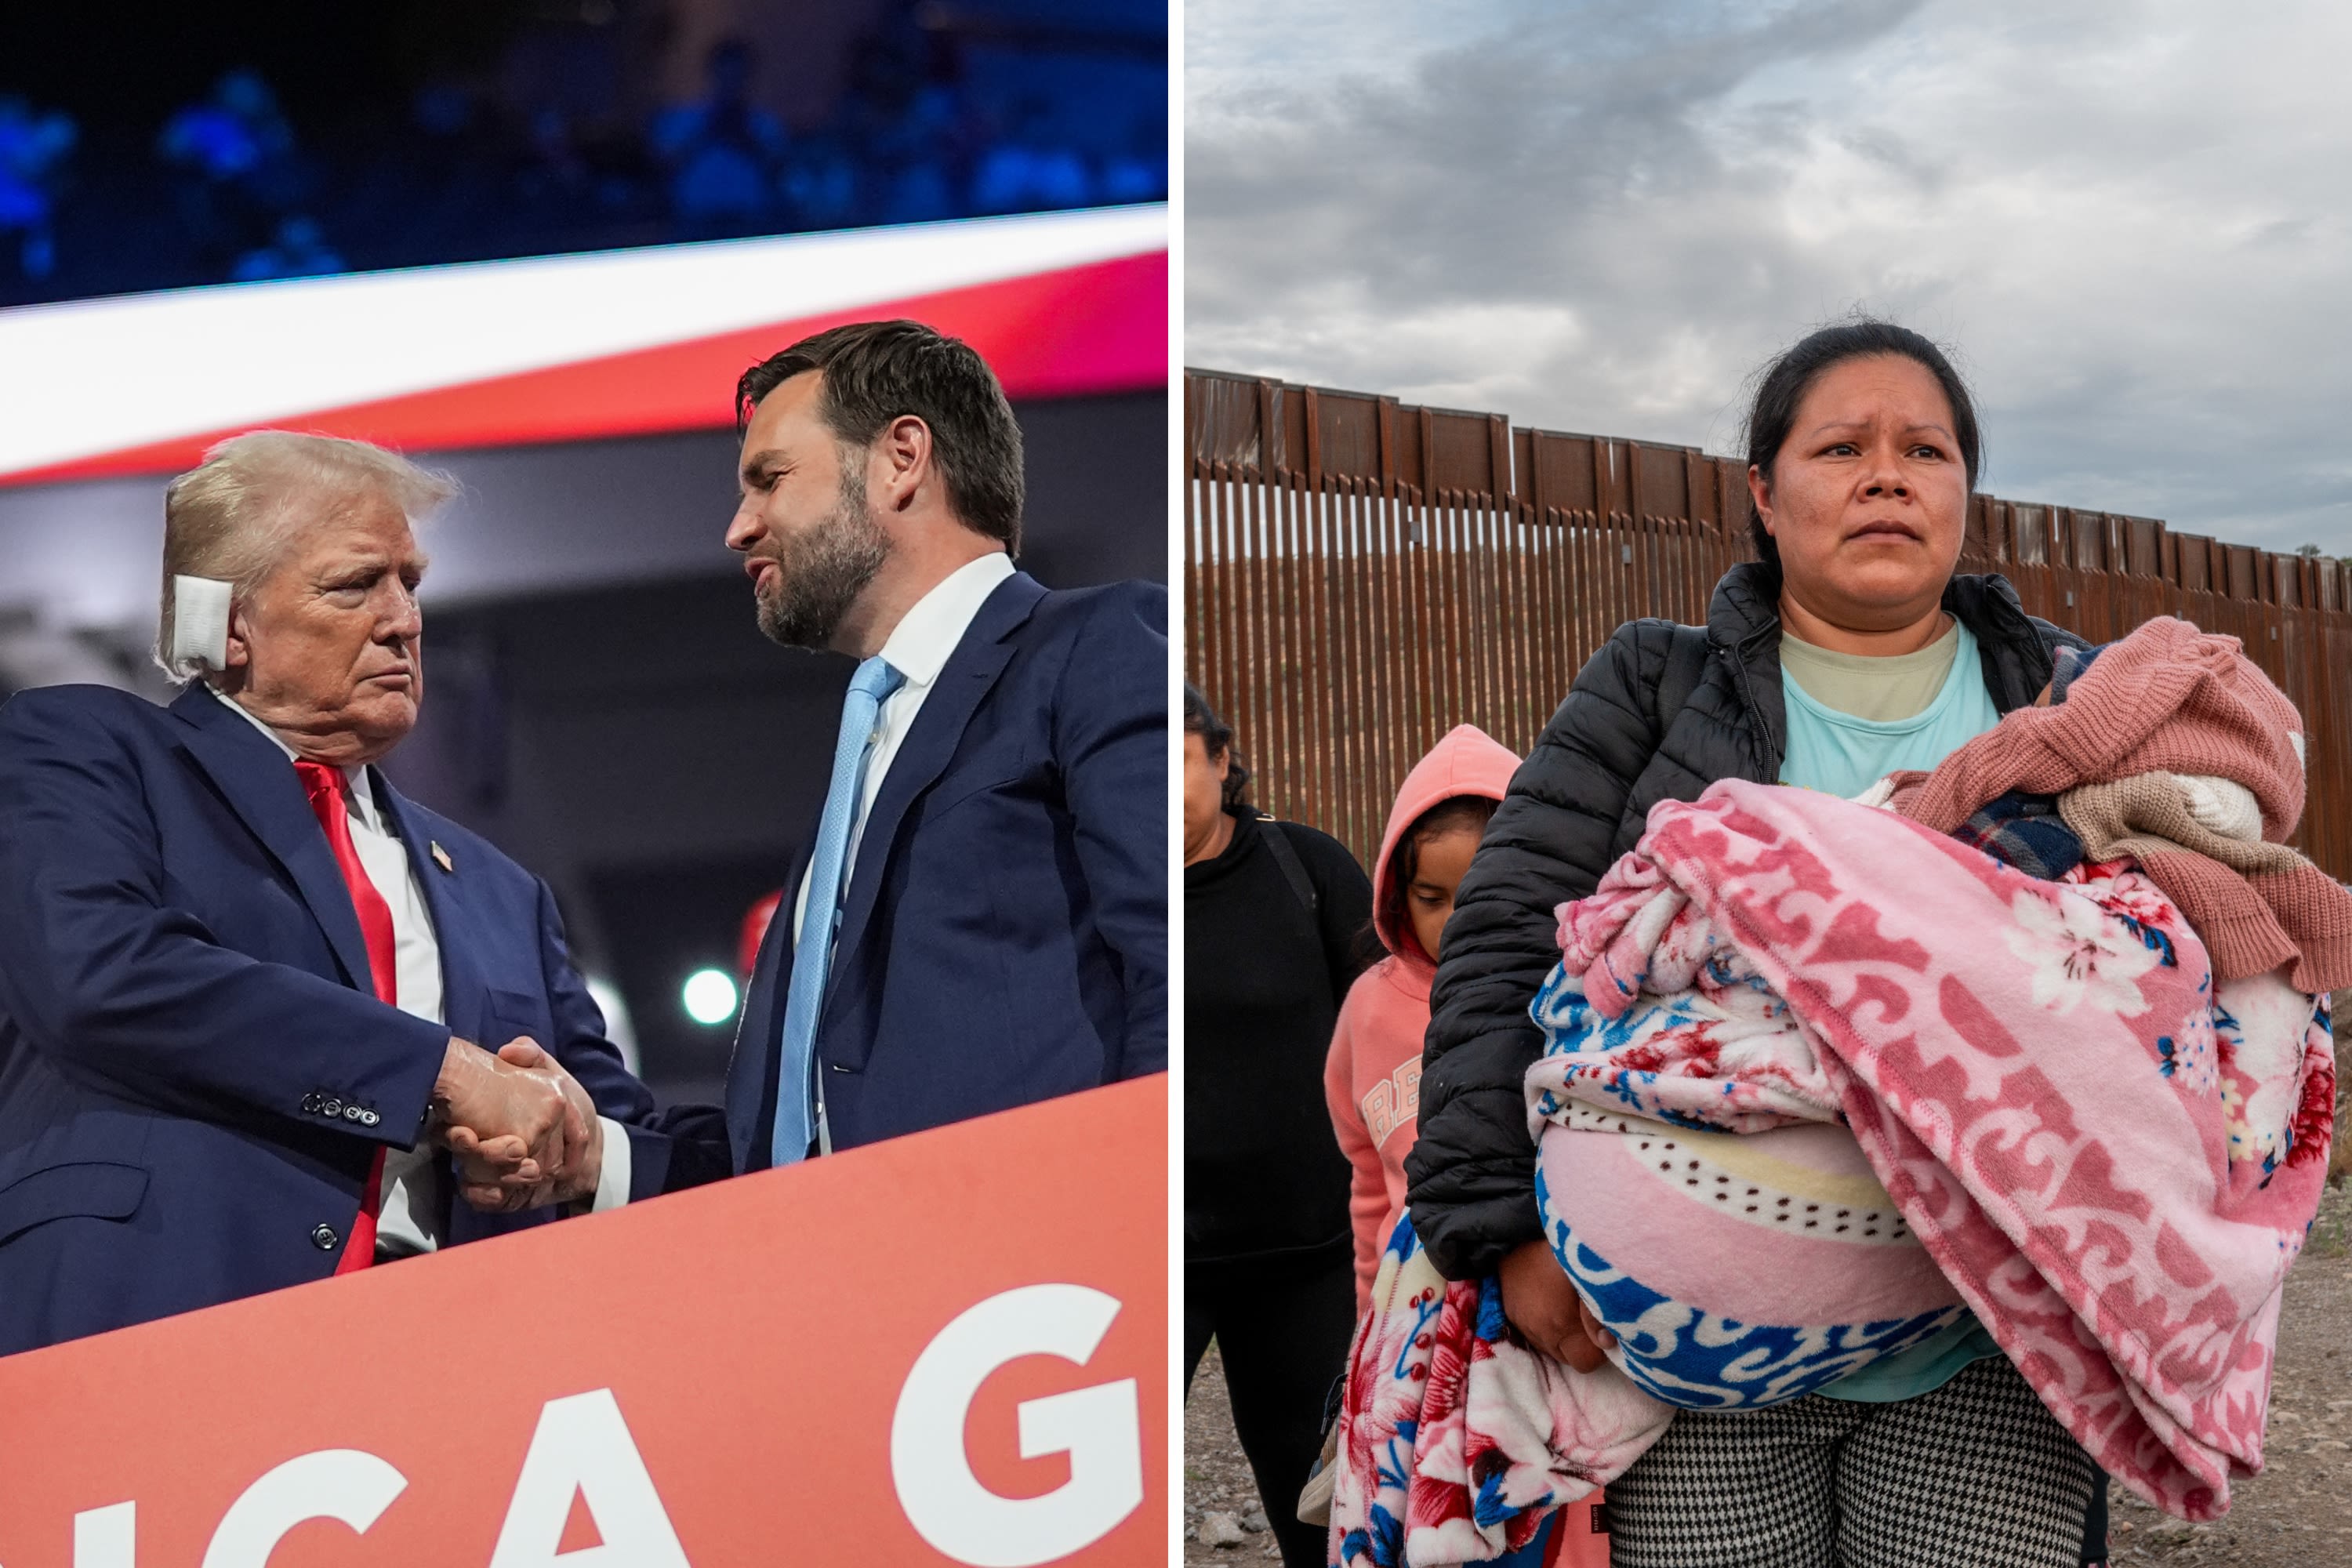 RNC Immigration Speakers: Ted Cruz, families of those killed by migrants